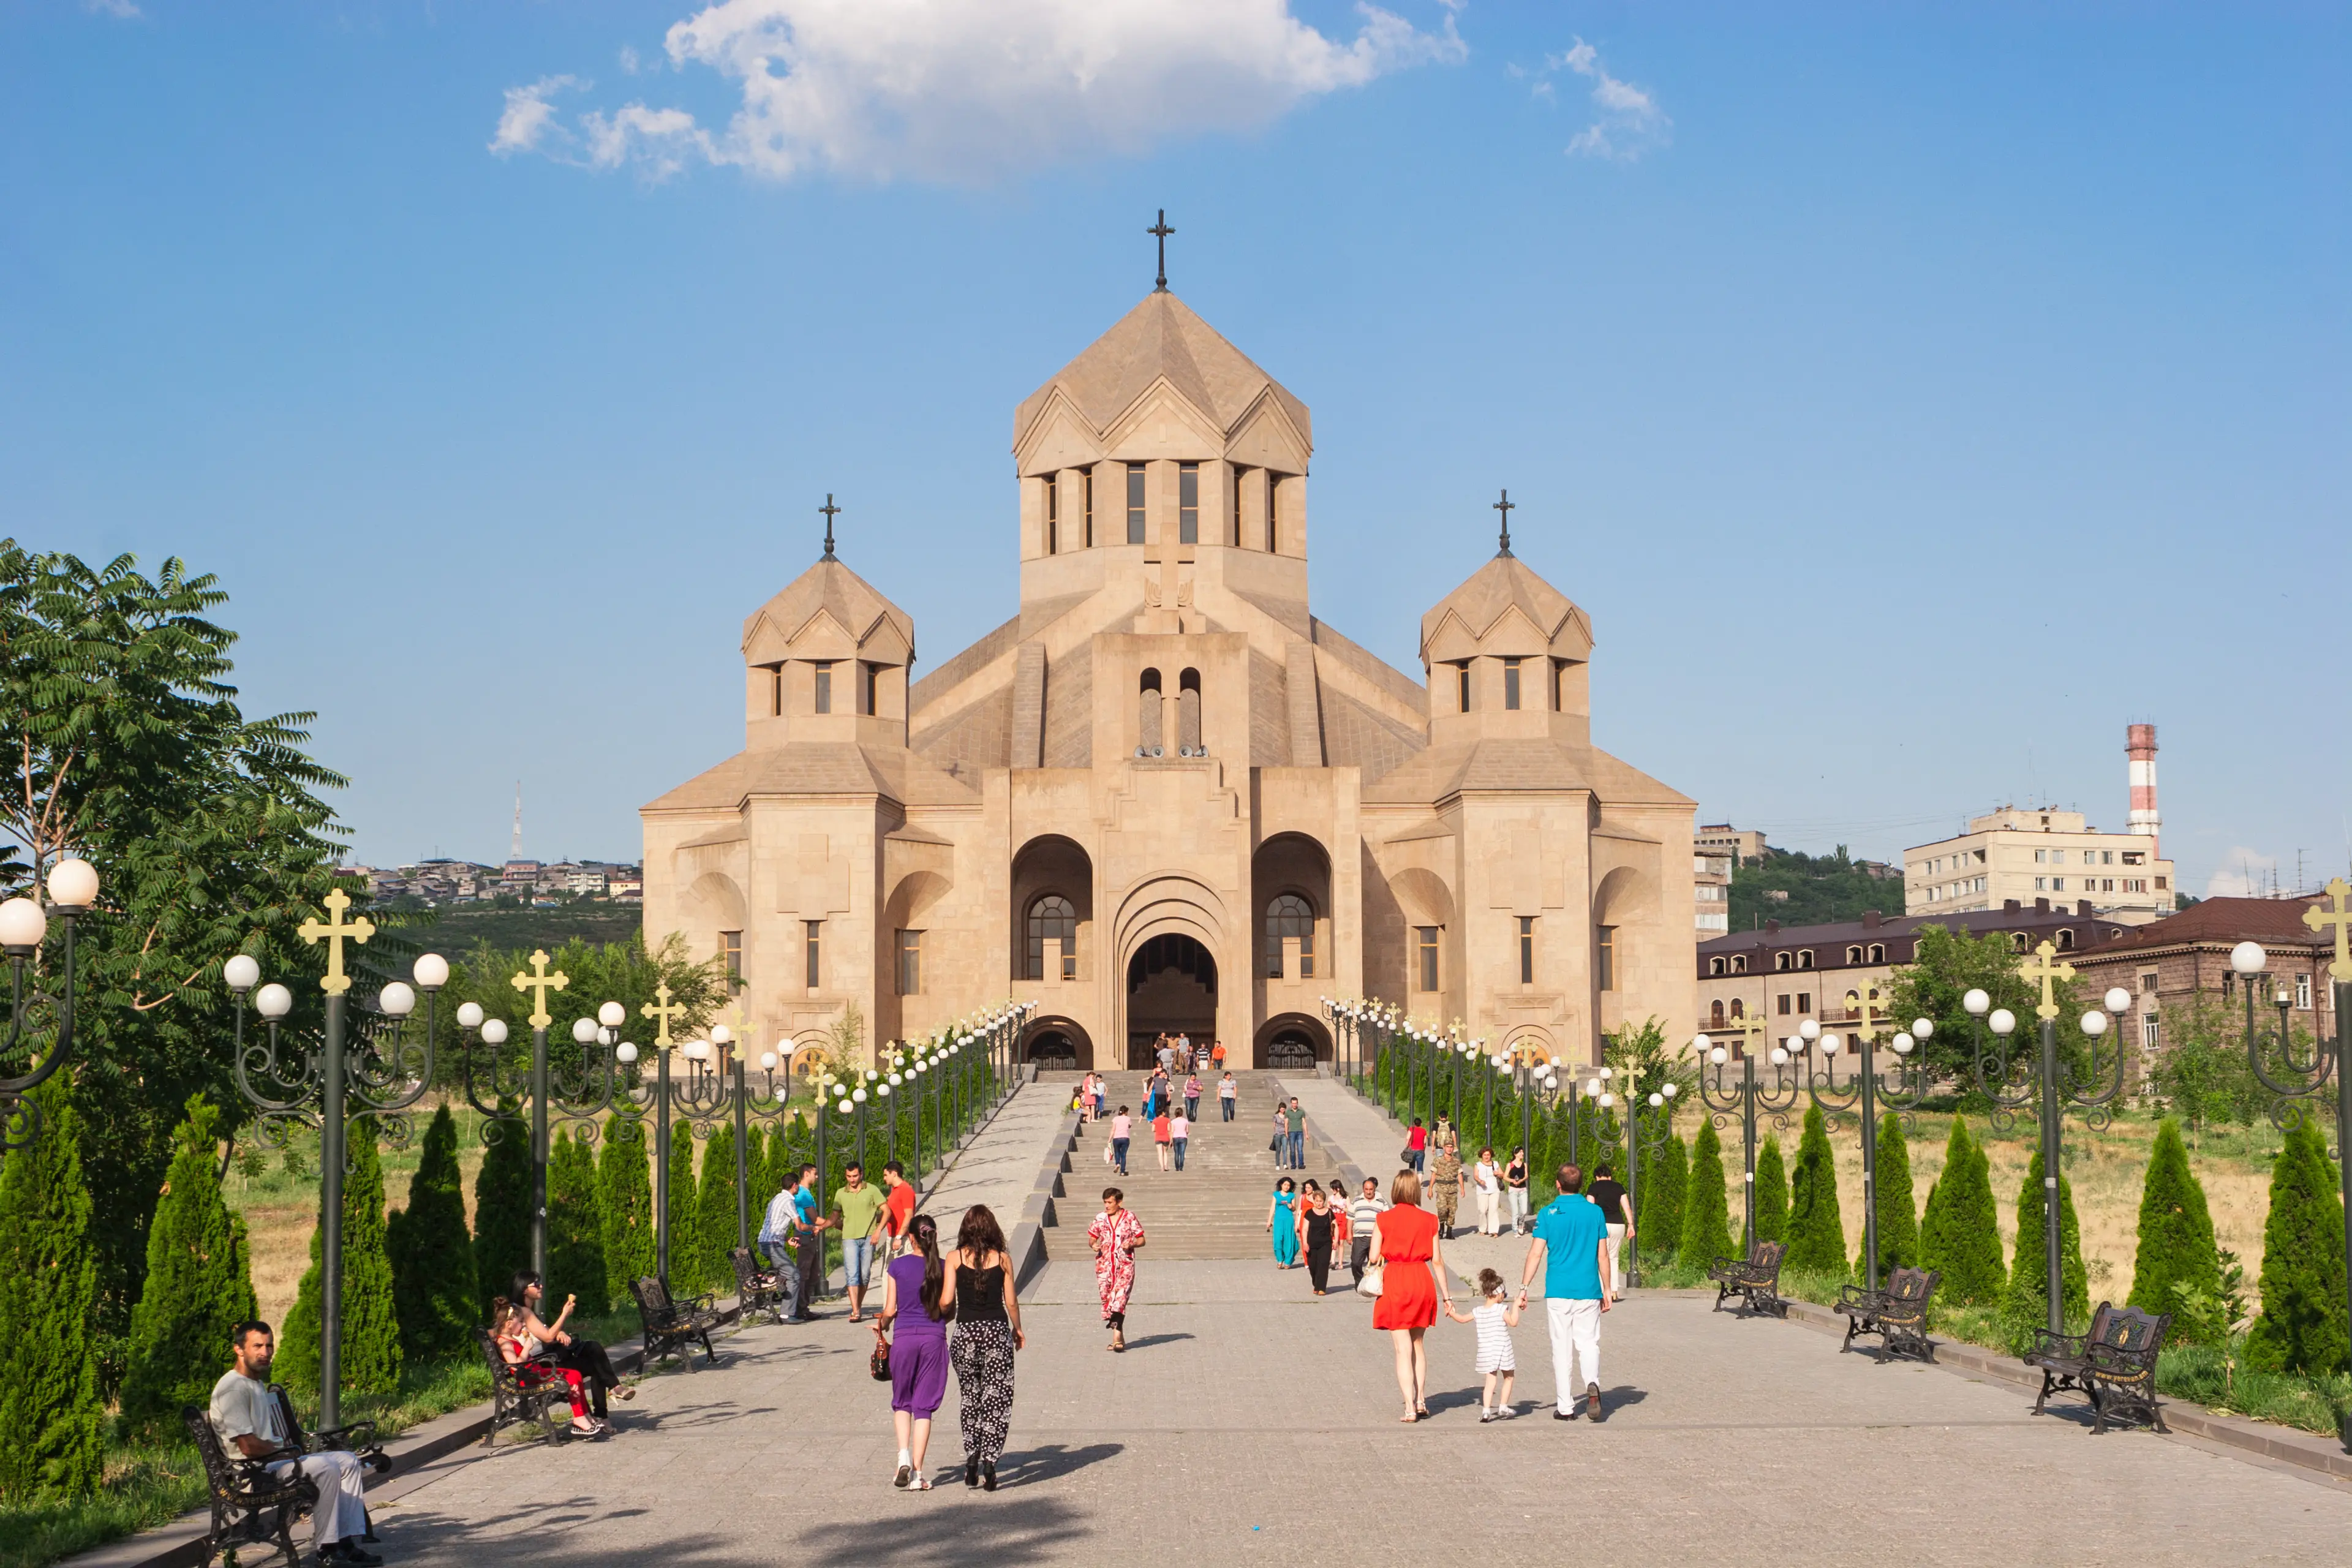 4-Day Family Adventure: Food, Shopping and Sightseeing in Yerevan